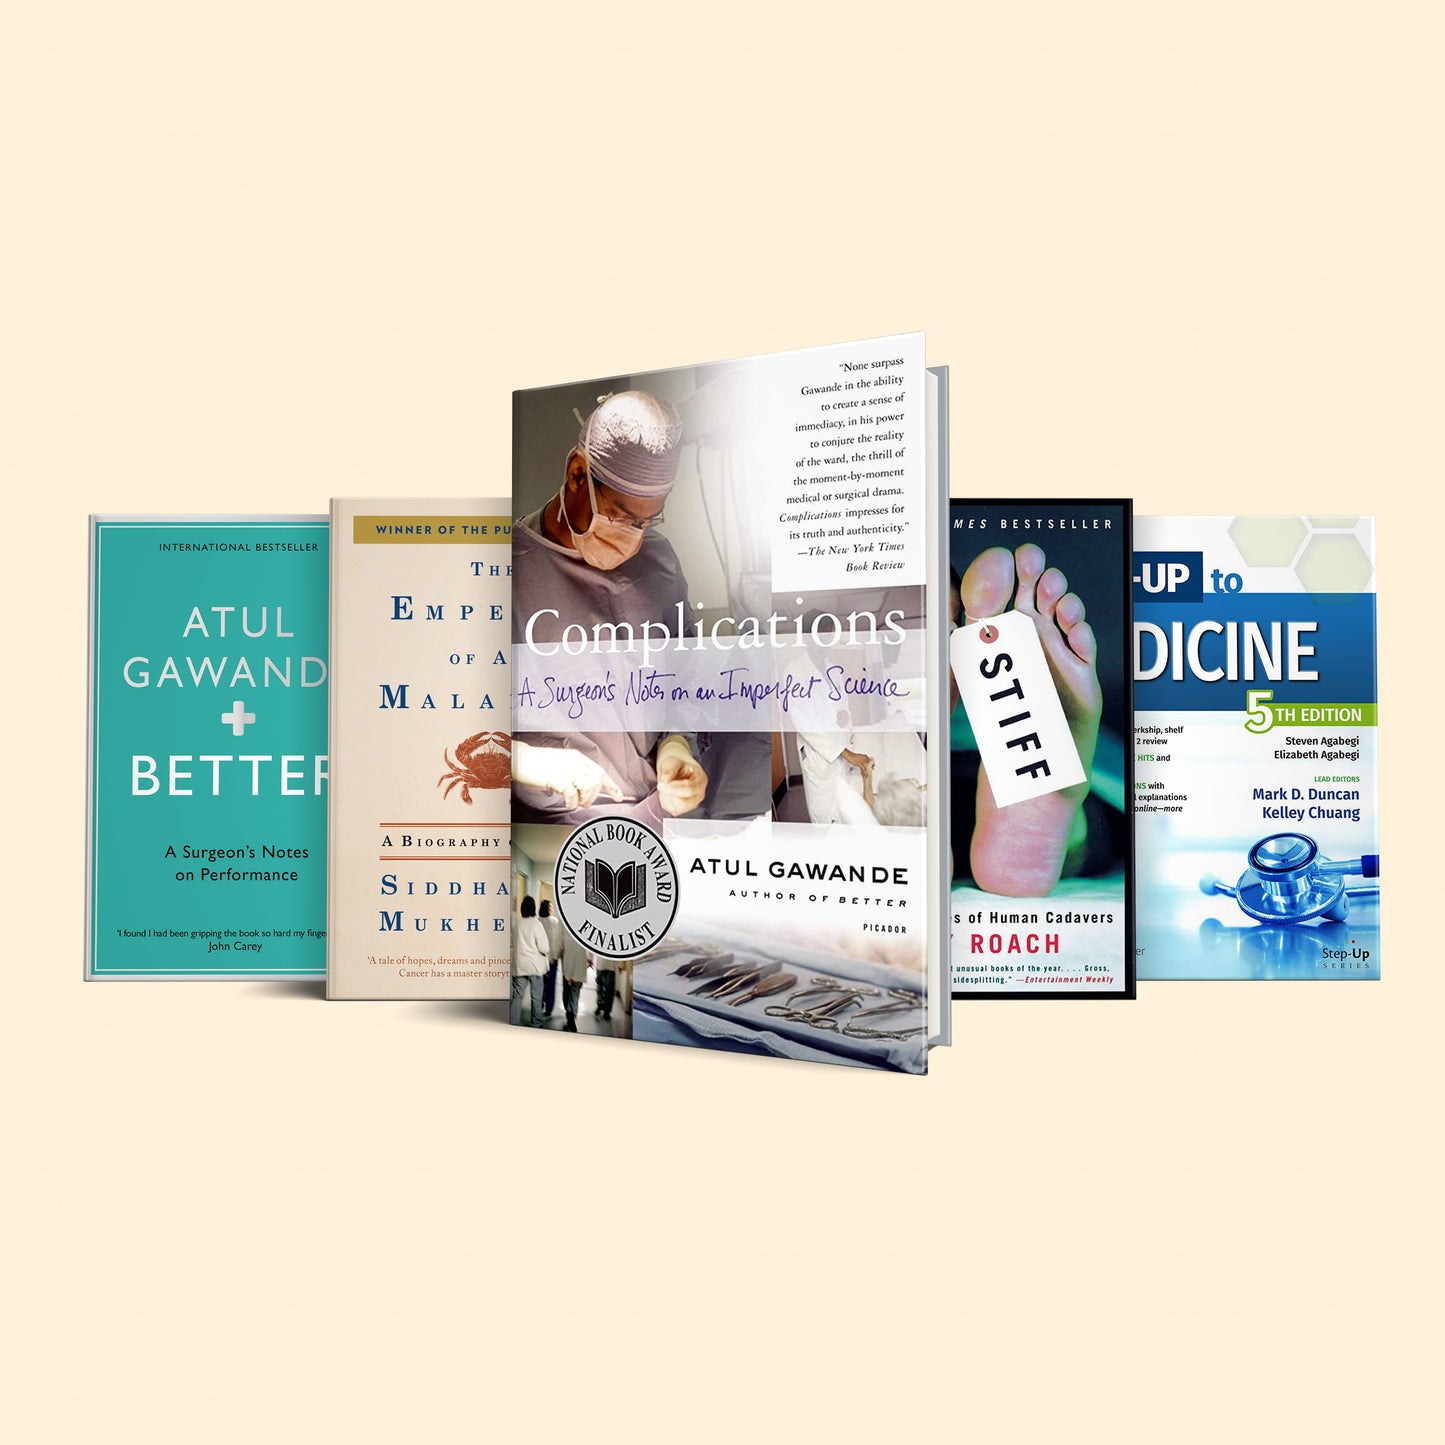 The Life and Death Bundle: Five Fascinating Books on Mortality and Medicine